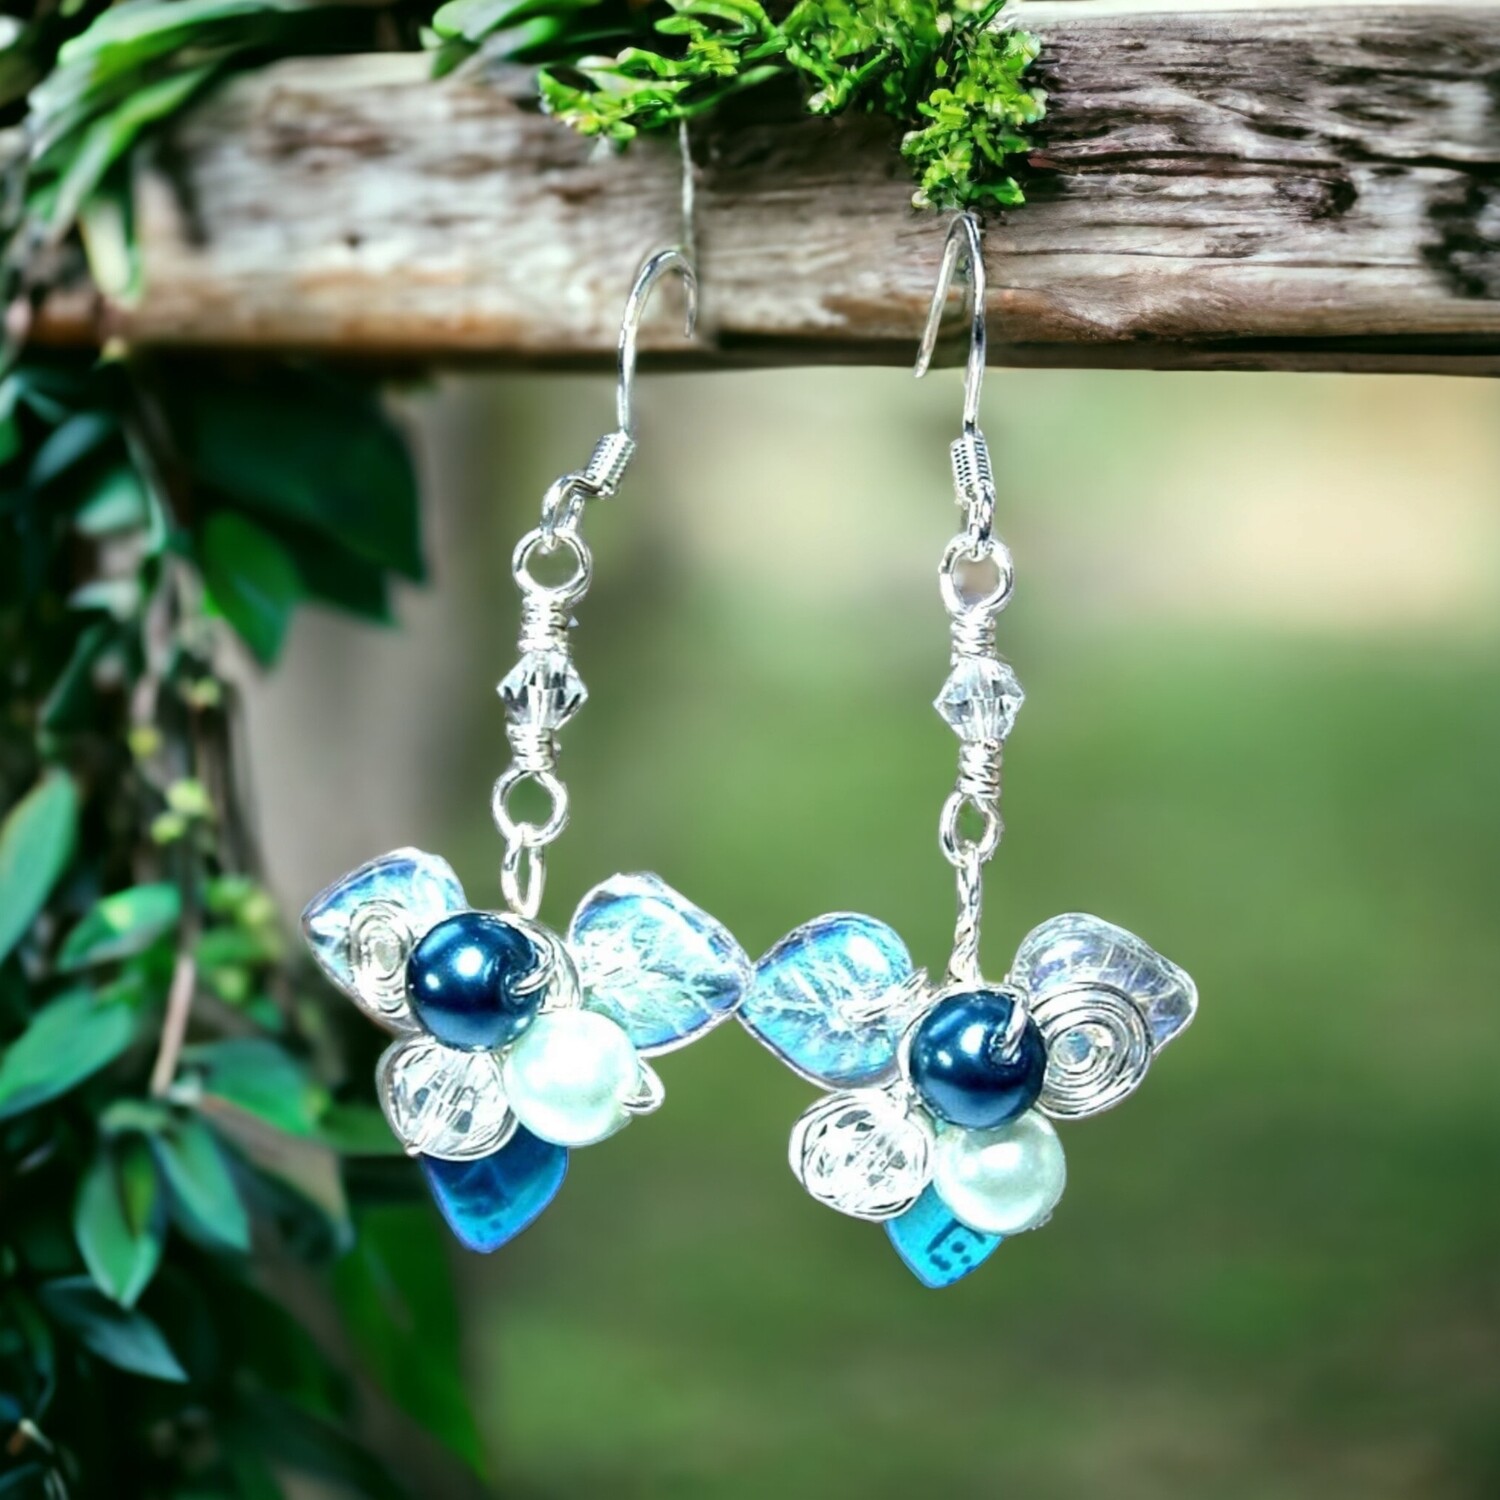 Moonlight Blue Dangle Earrings - Fairy Bower Collection